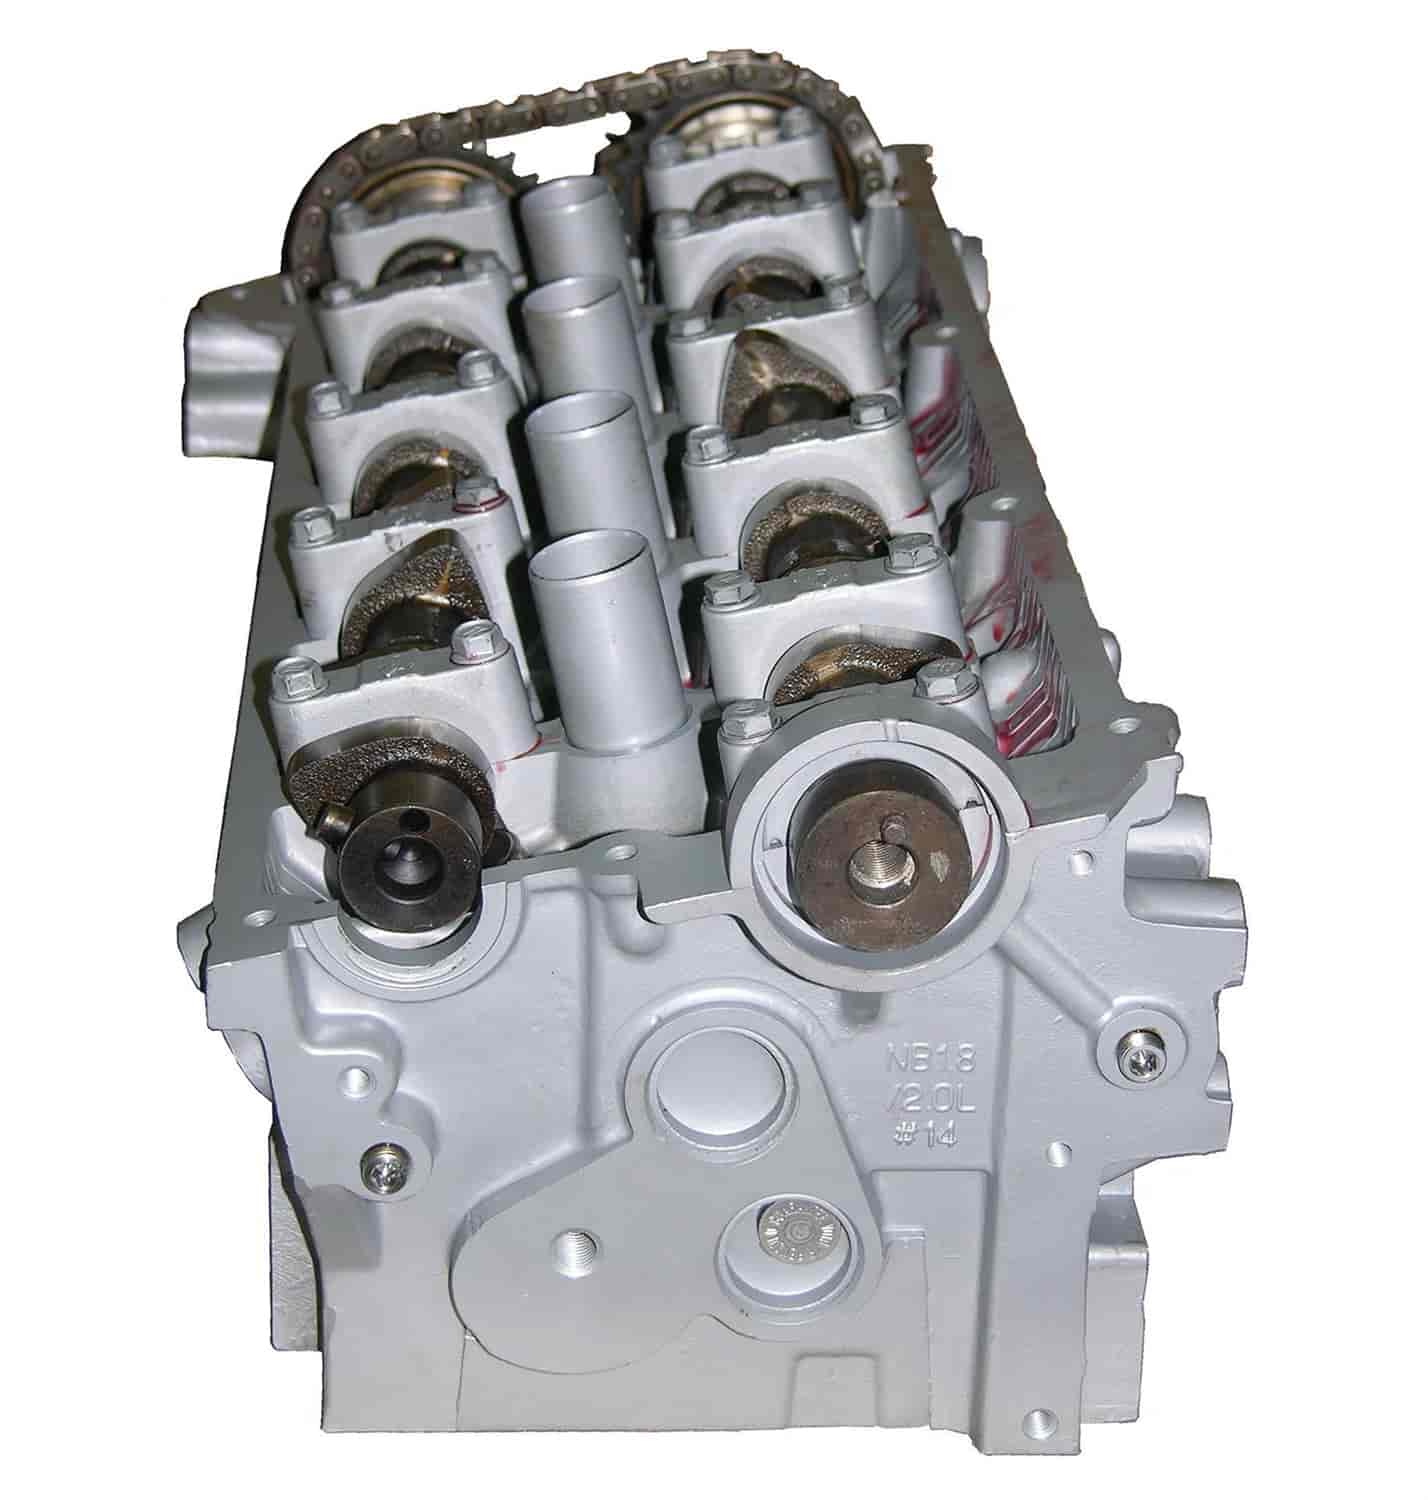 Remanufactured Cylinder Head for 2001-2002 Hyundai Elantra with 2.0L L4